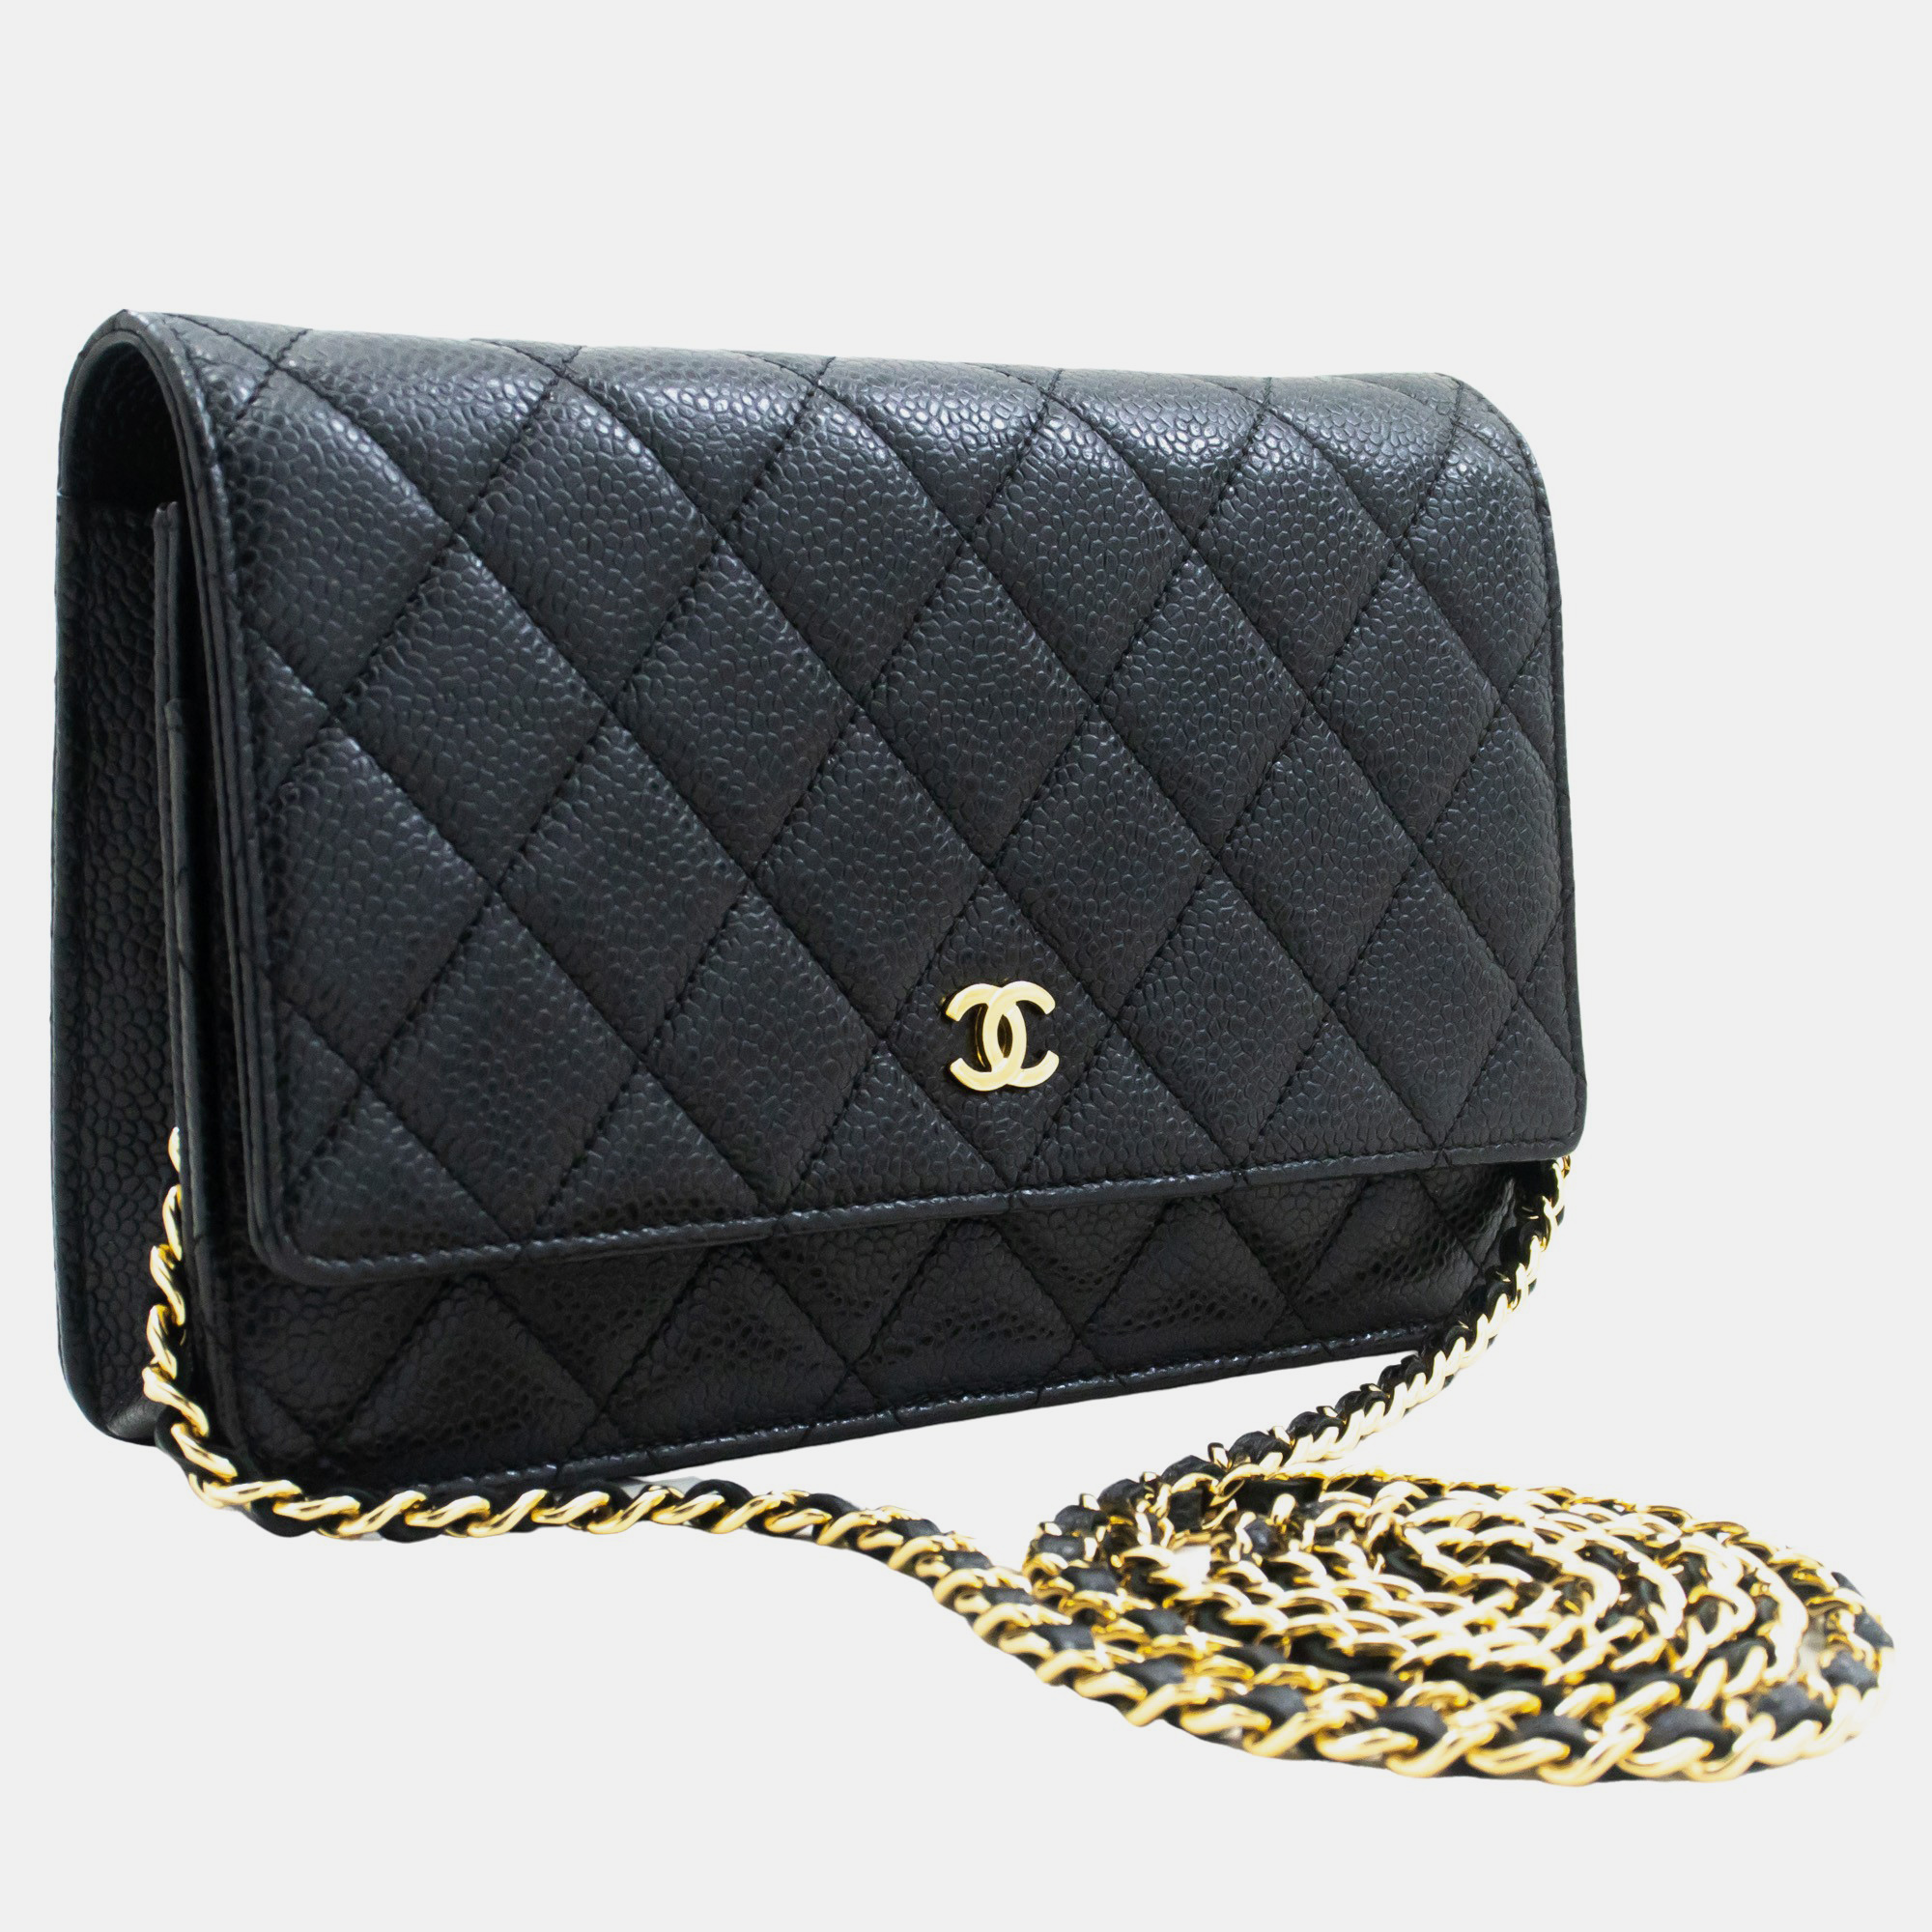 Chanel black leather wallet on chain bag